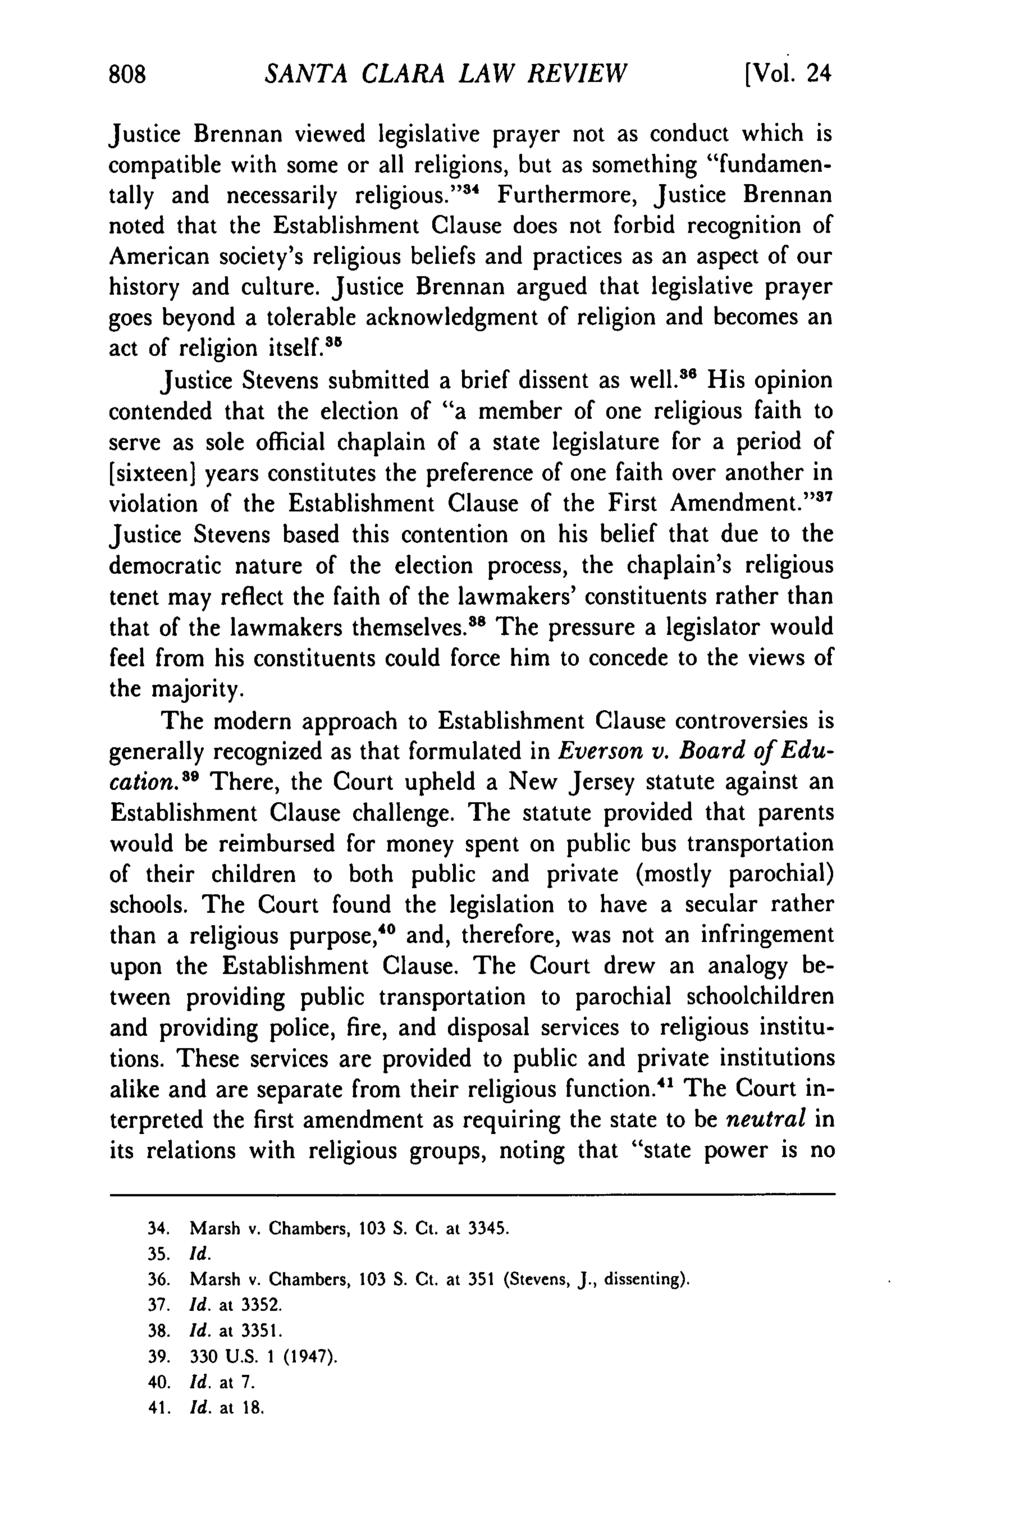 SANTA CLARA LAW REVIEW [Vol. 24 Justice Brennan viewed legislative prayer not as conduct which is compatible with some or all religions, but as something "fundamentally and necessarily religious.